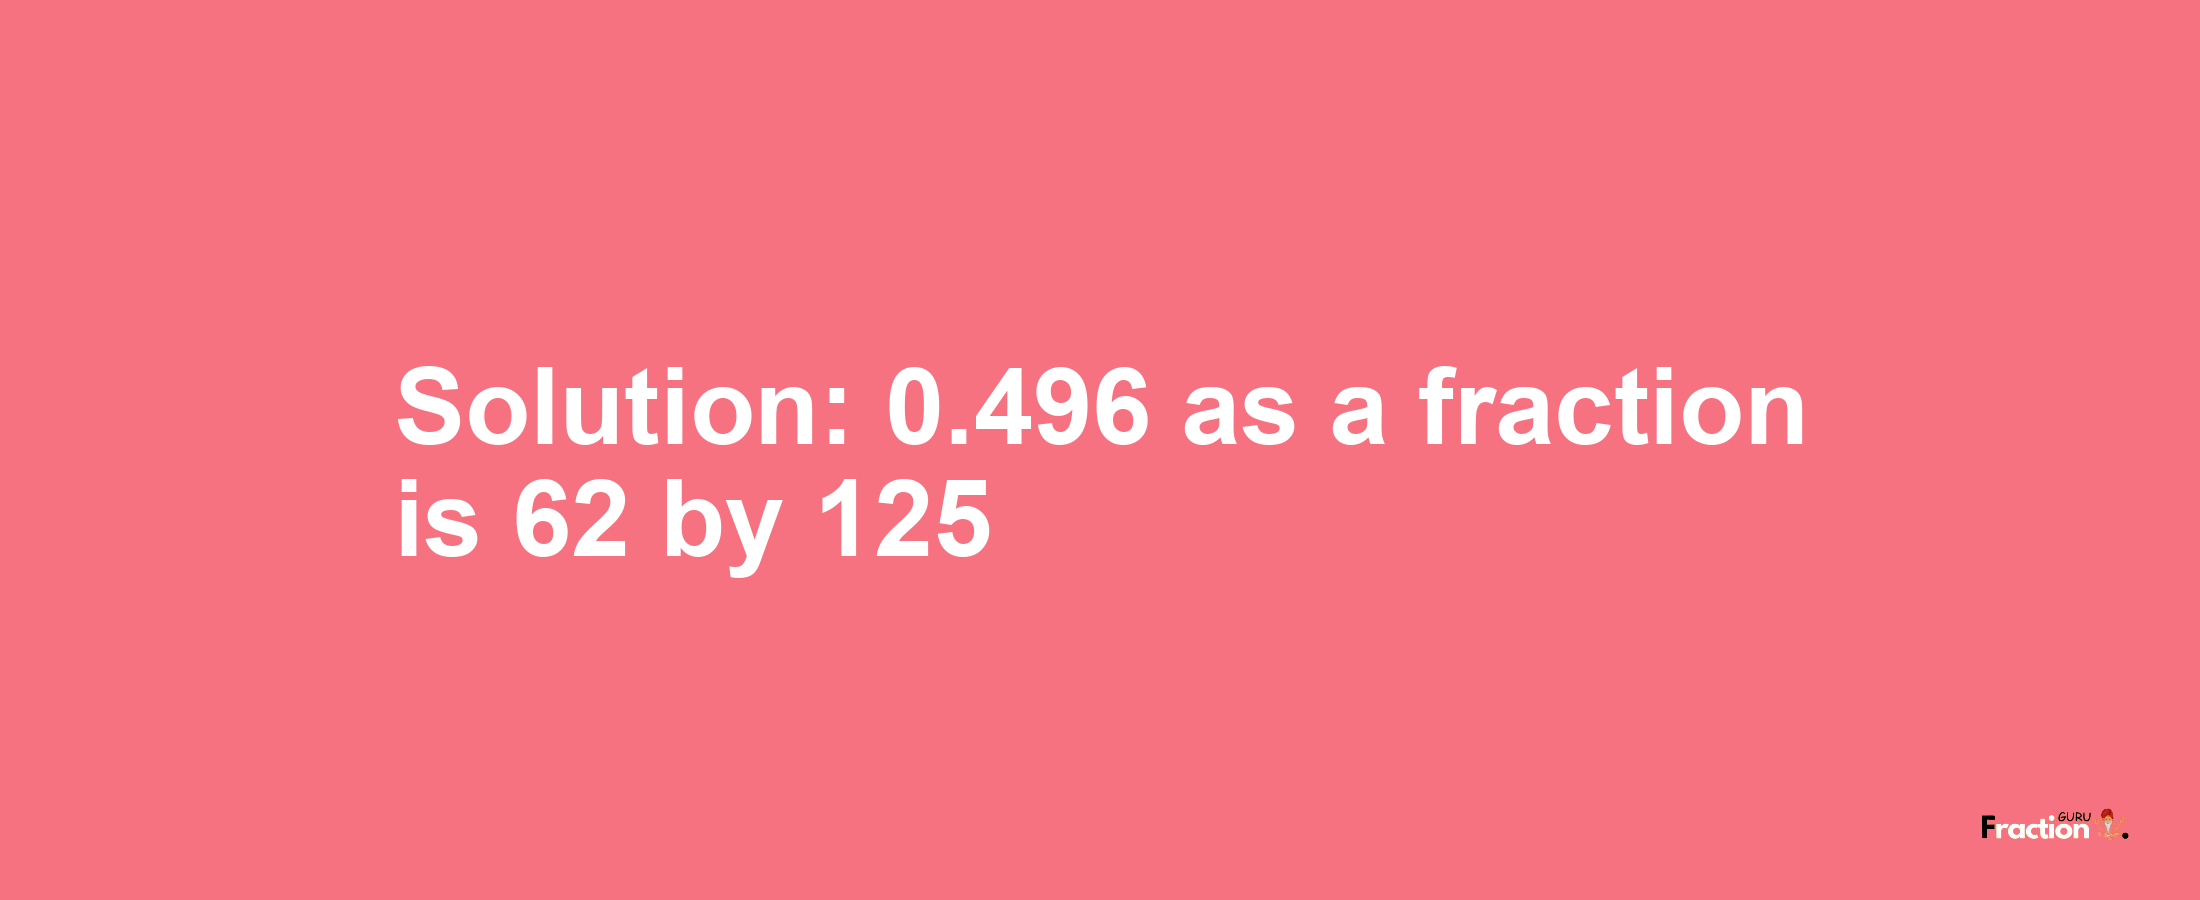 Solution:0.496 as a fraction is 62/125